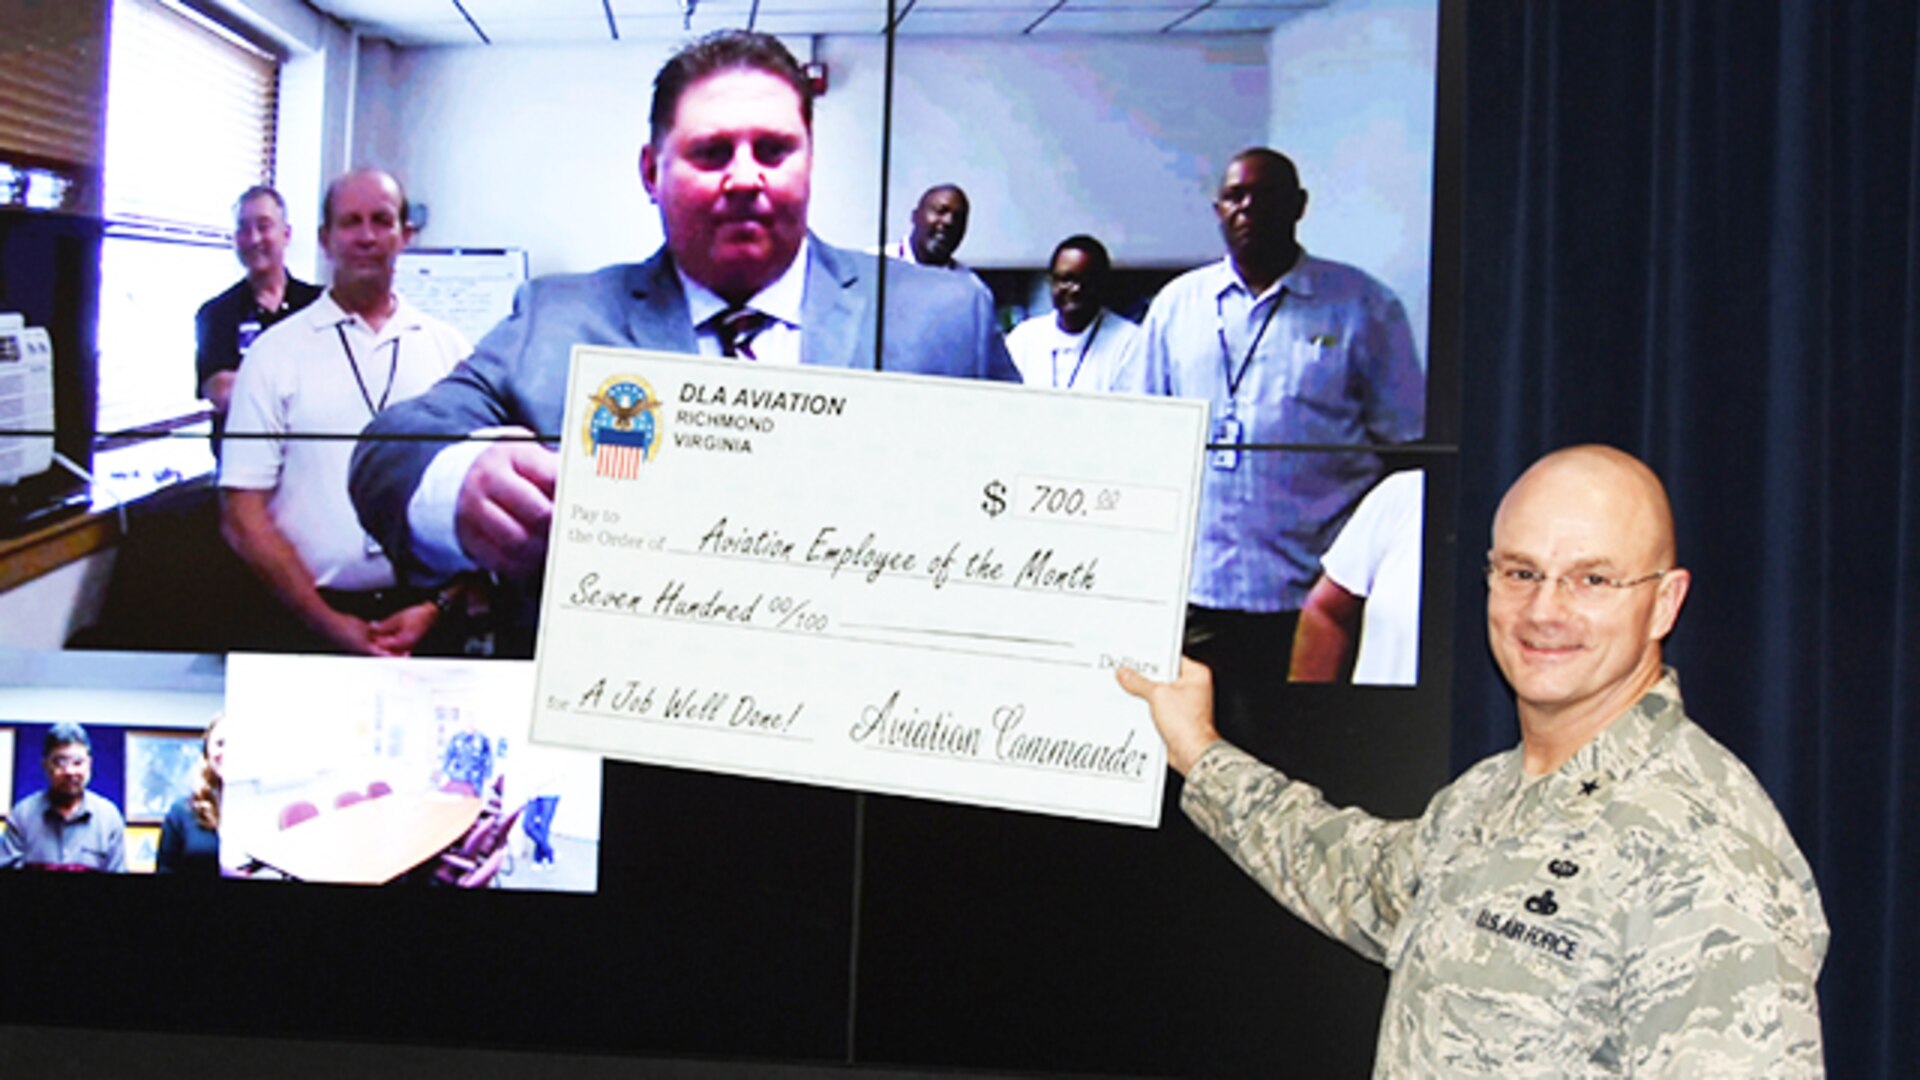 Defense Logistics Agency Aviation Naval Air Station at Jacksonville Florida employee David Scott was honored as the January 2016 Employee of the Month in a video teleconference ceremony at Defense Supply Center Richmond, Virginia, March 16, 2016. Scott works as an equipment specialist in the Customer Operations Directorate.